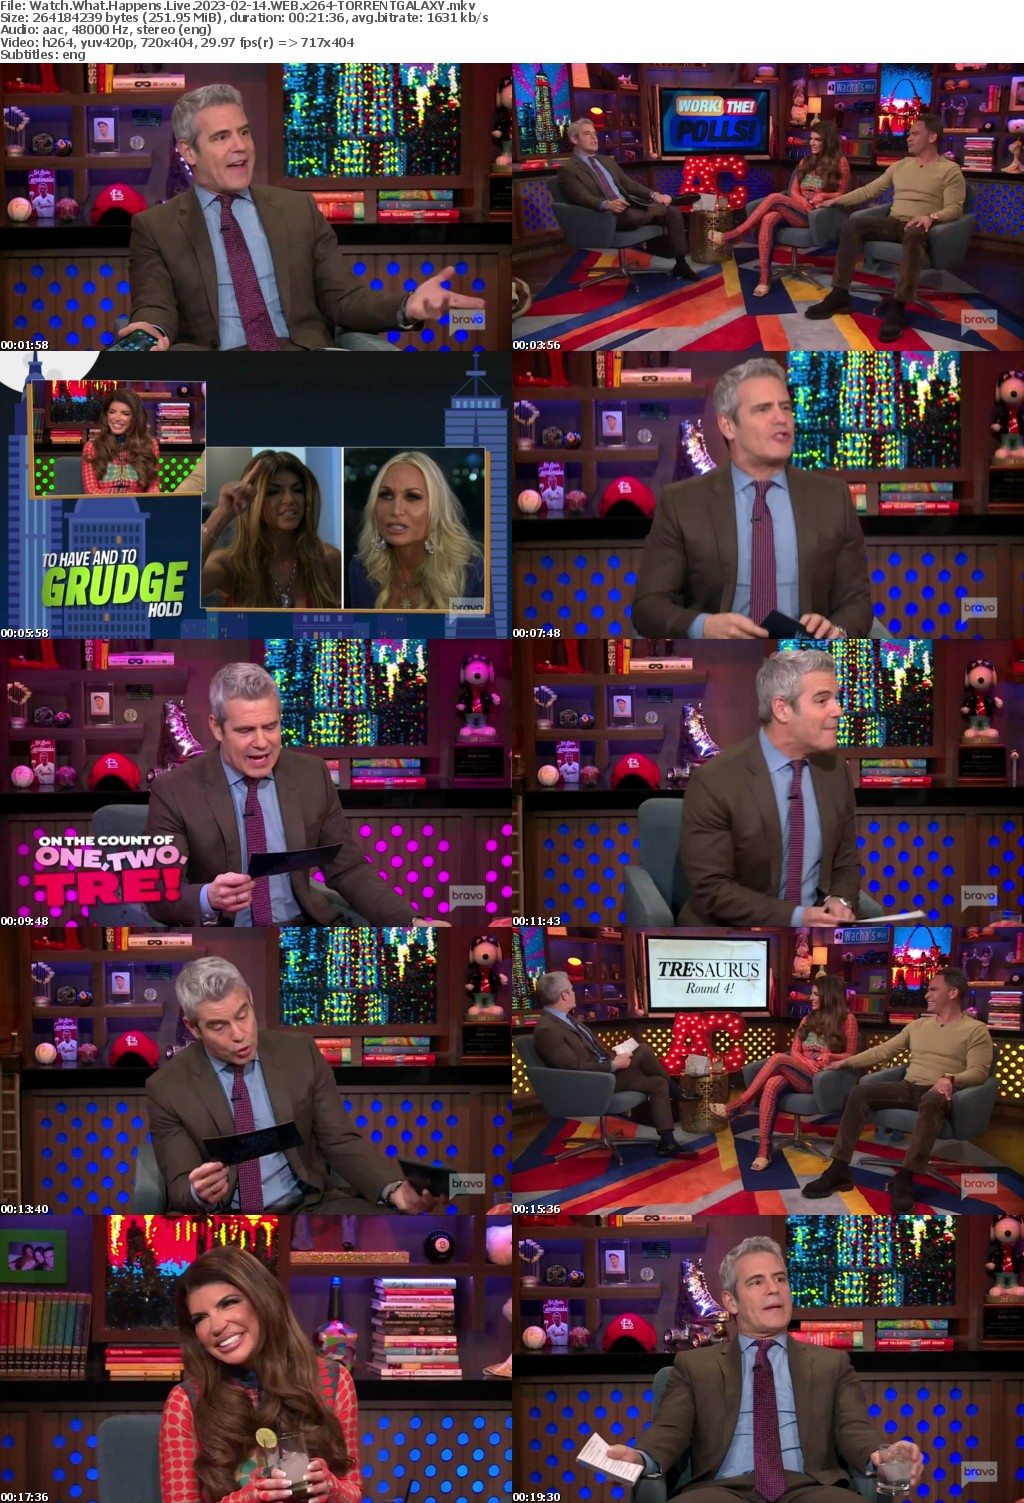 Watch What Happens Live 2023-02-14 WEB x264-GALAXY